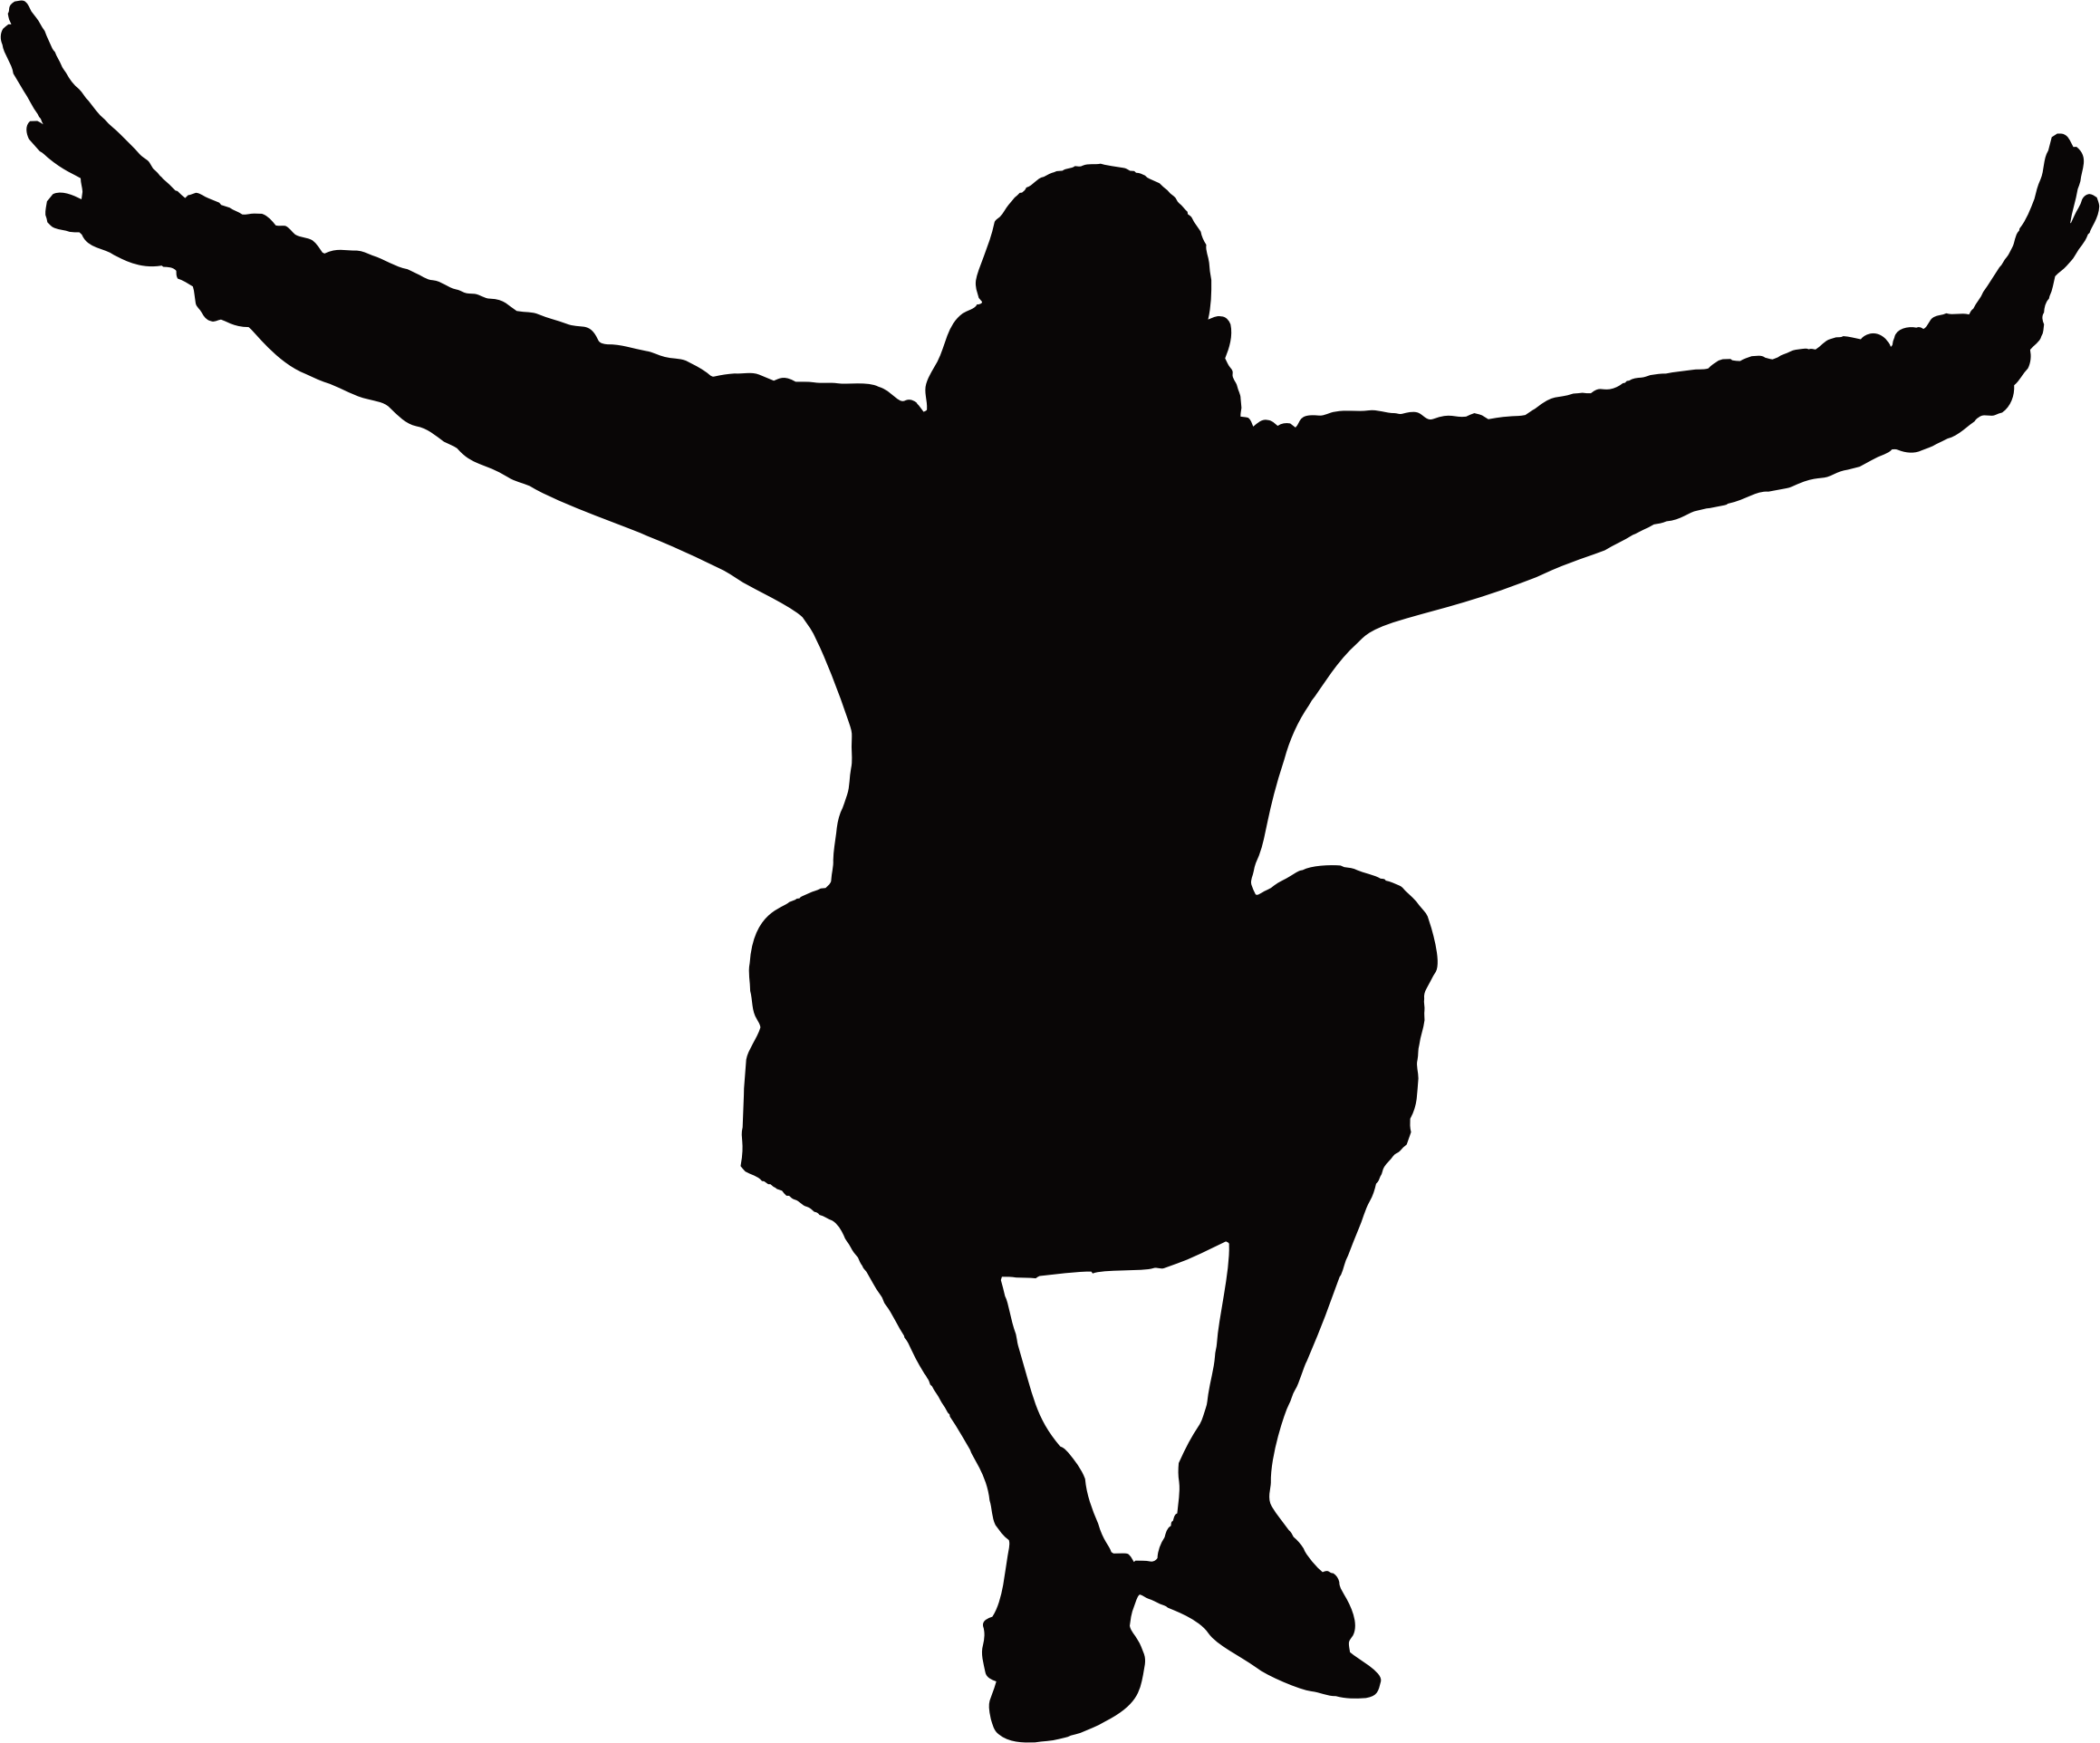 Big Image - Jumping Silhouette Png (2318x1924)